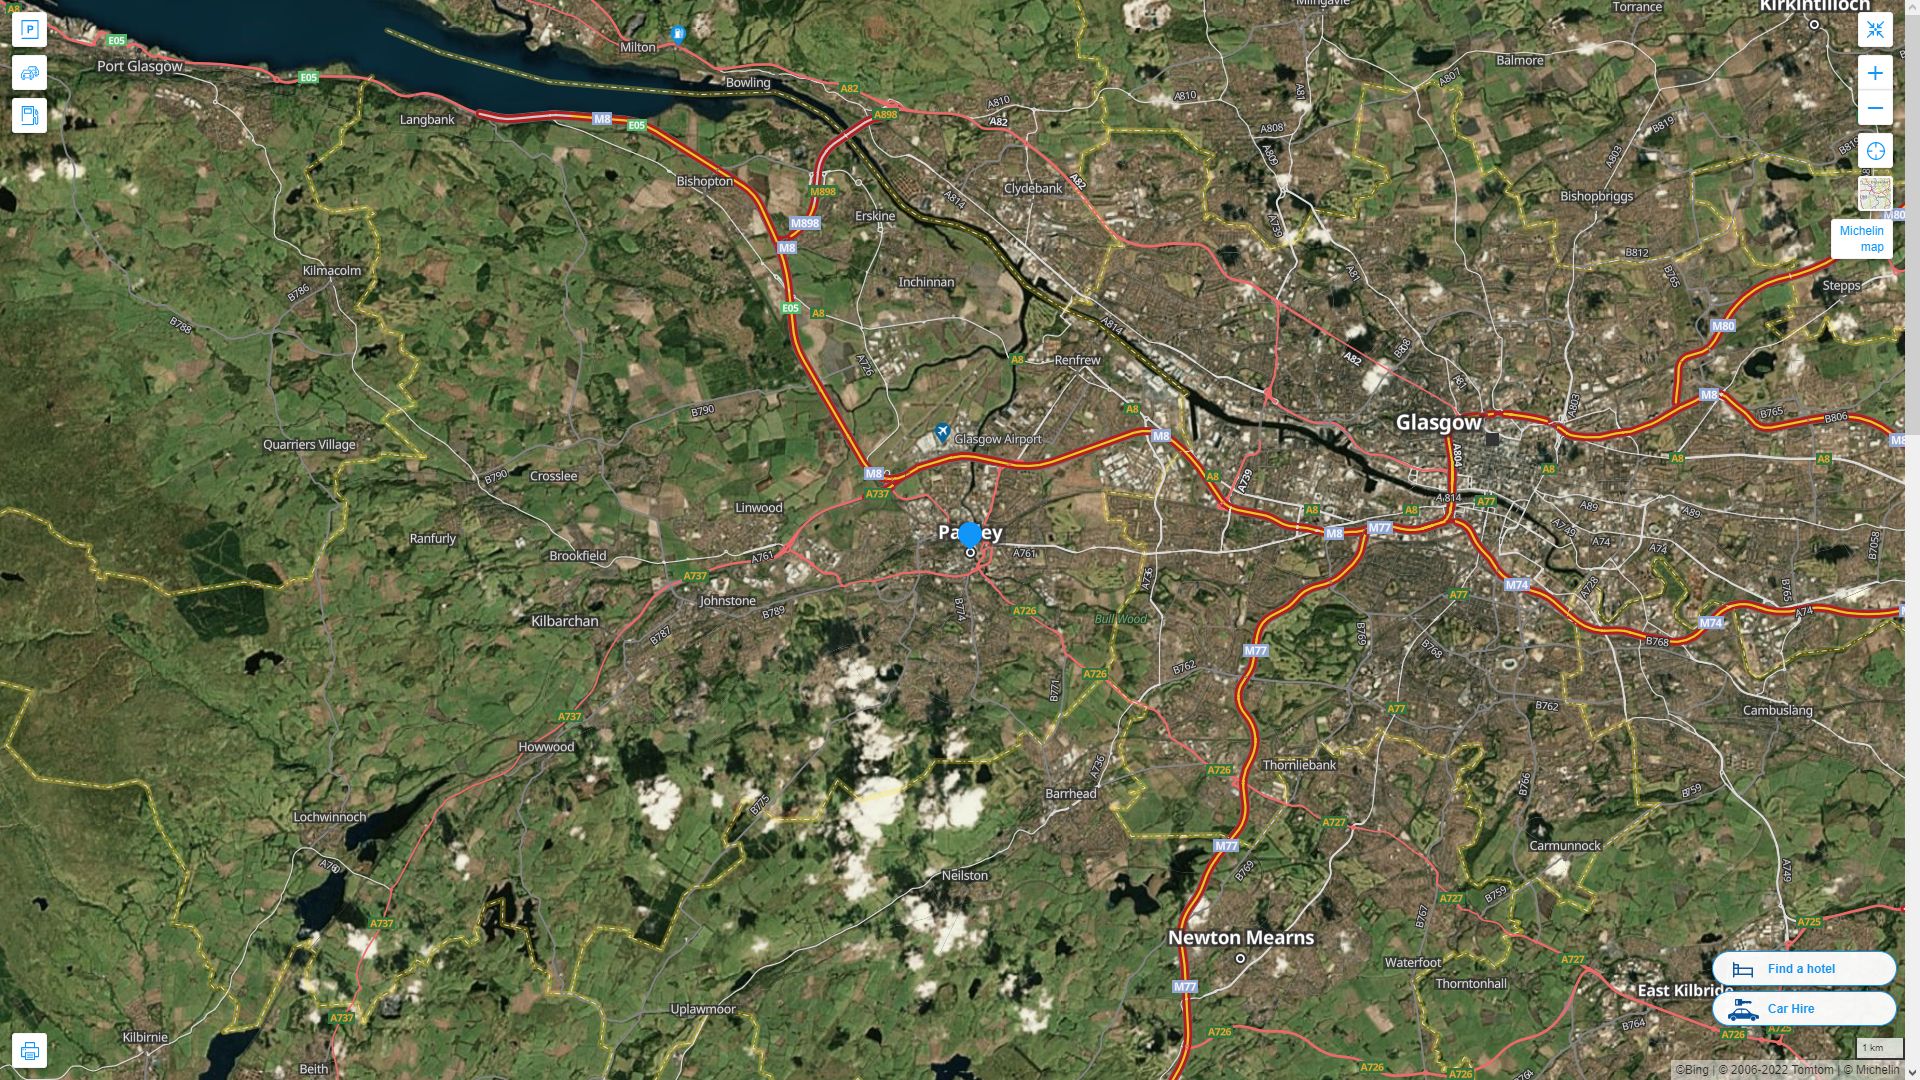 Paisley Highway and Road Map with Satellite View